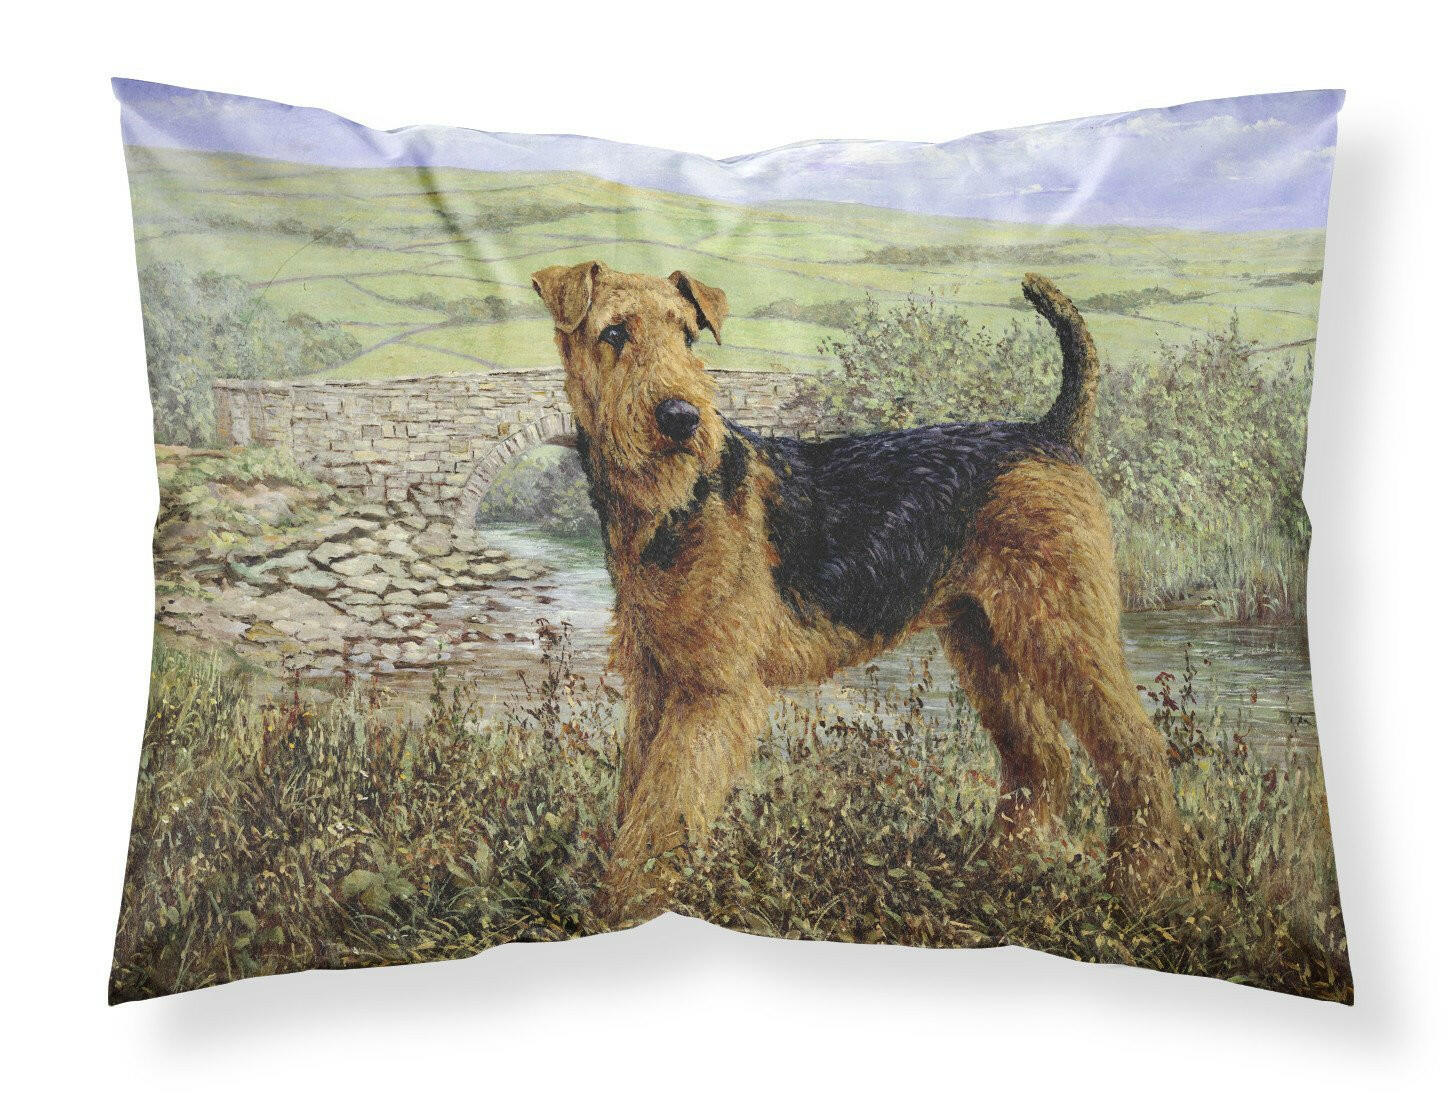 Airedale Terrier The Kings Country Fabric Standard Pillowcase HMHE0245PILLOWCASE by Caroline's Treasures